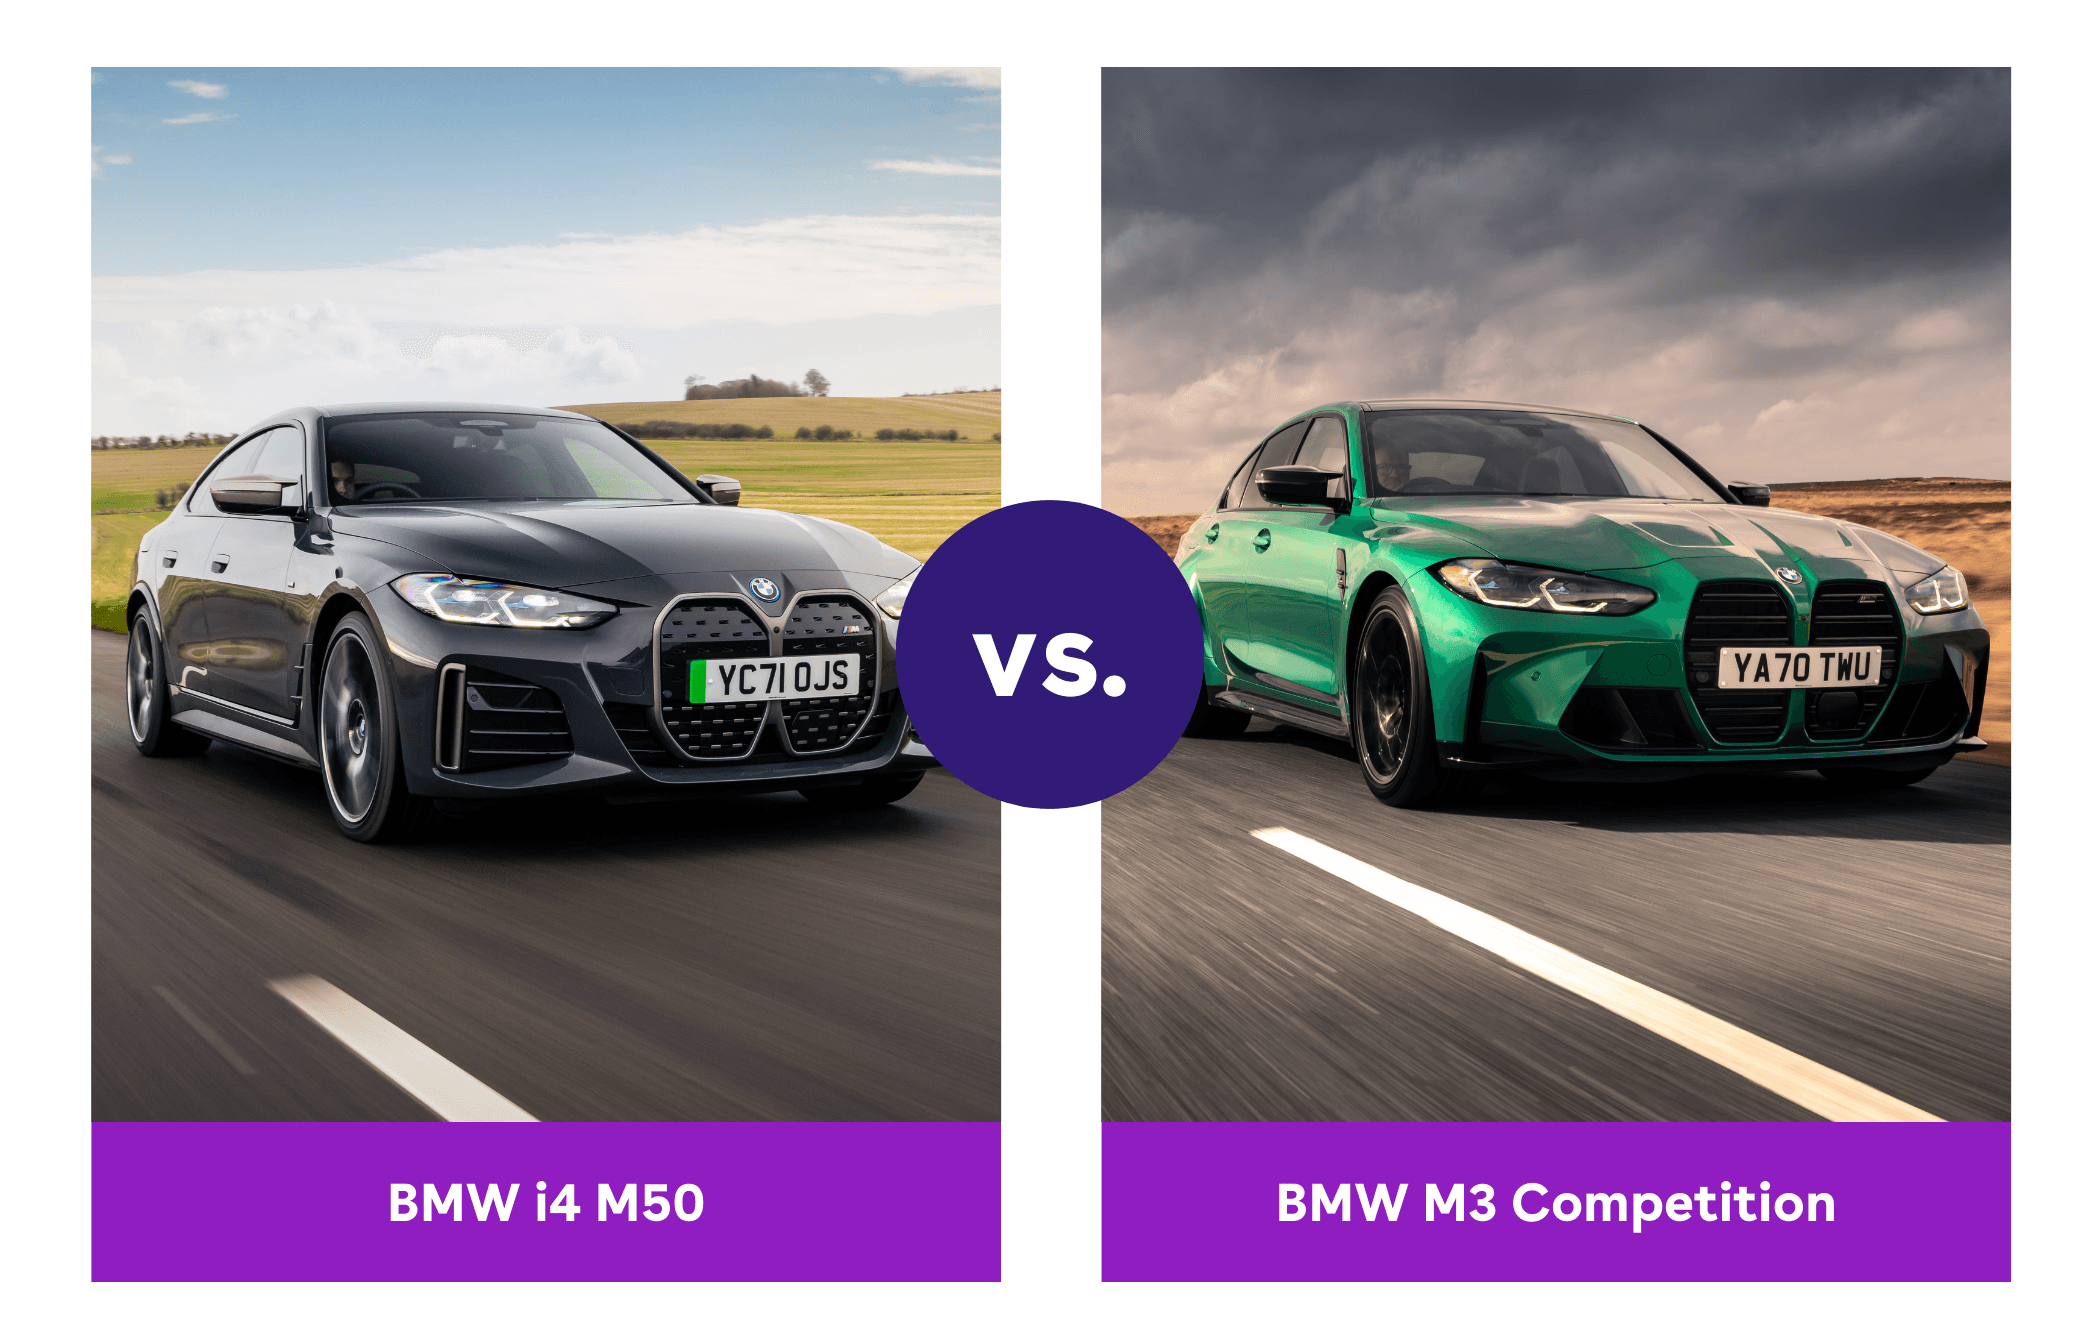 Side-by-side view of BMW i4 M50 and BMW M3 Competition driving